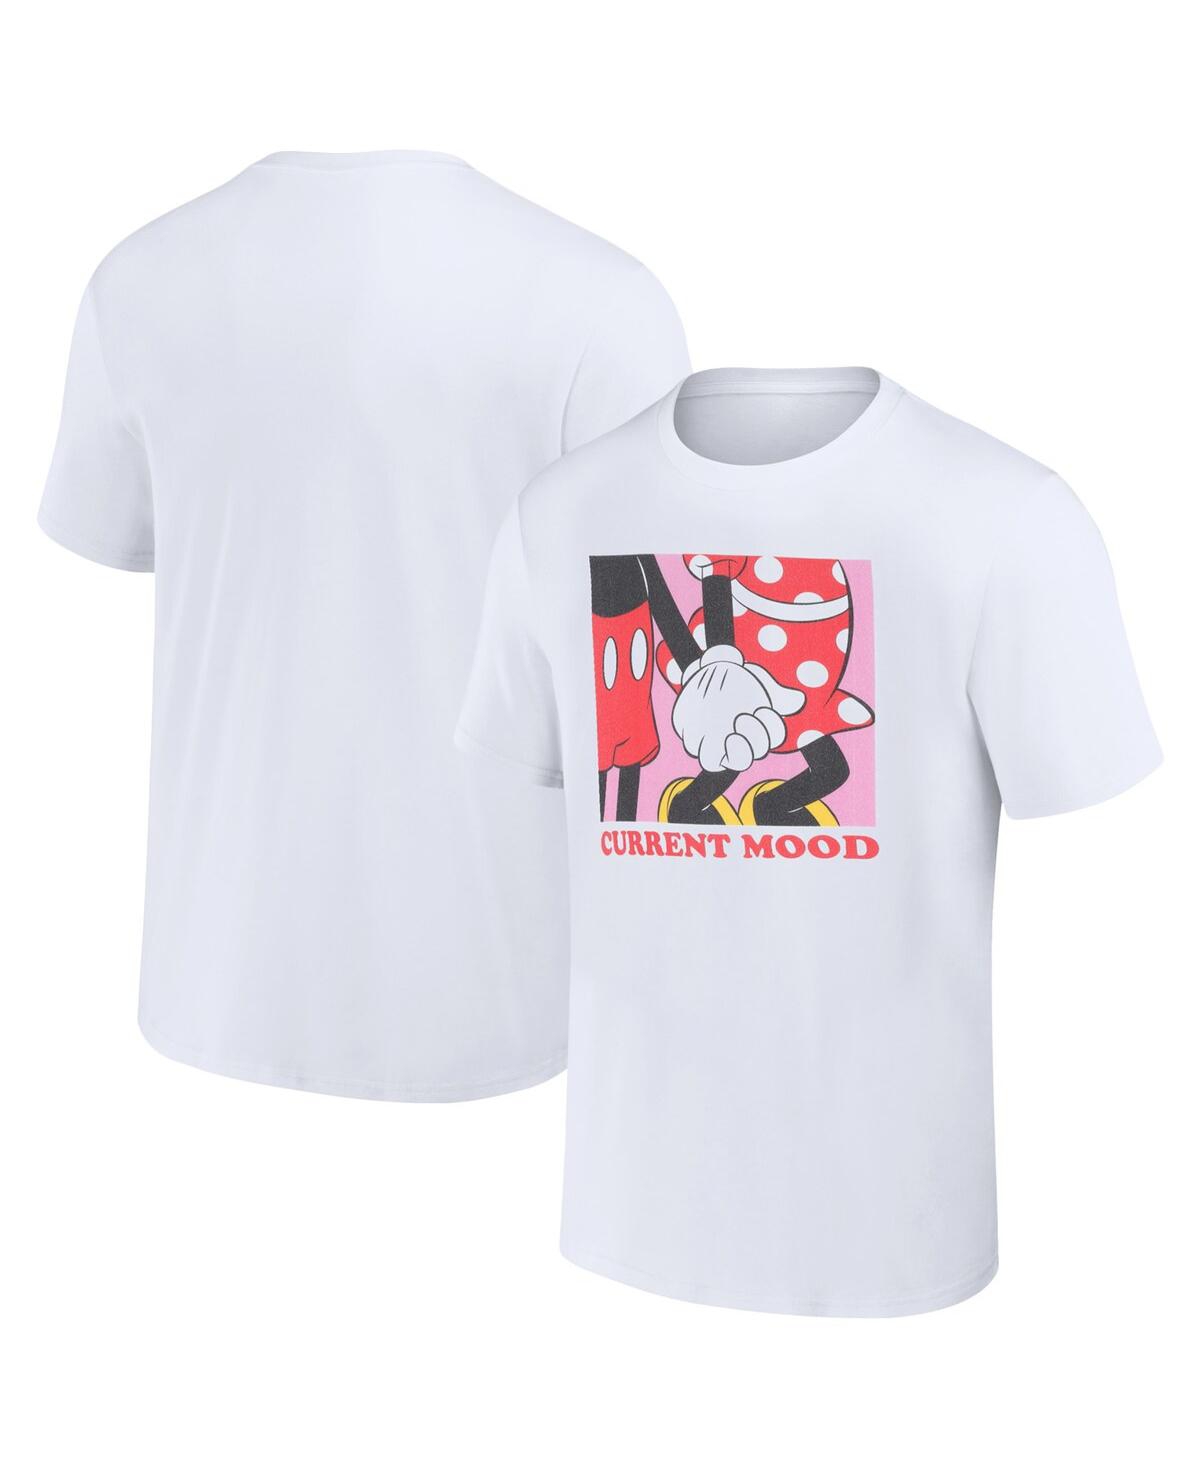 Men's and Women's White Mickey & Friends Current Mood T-shirt - White